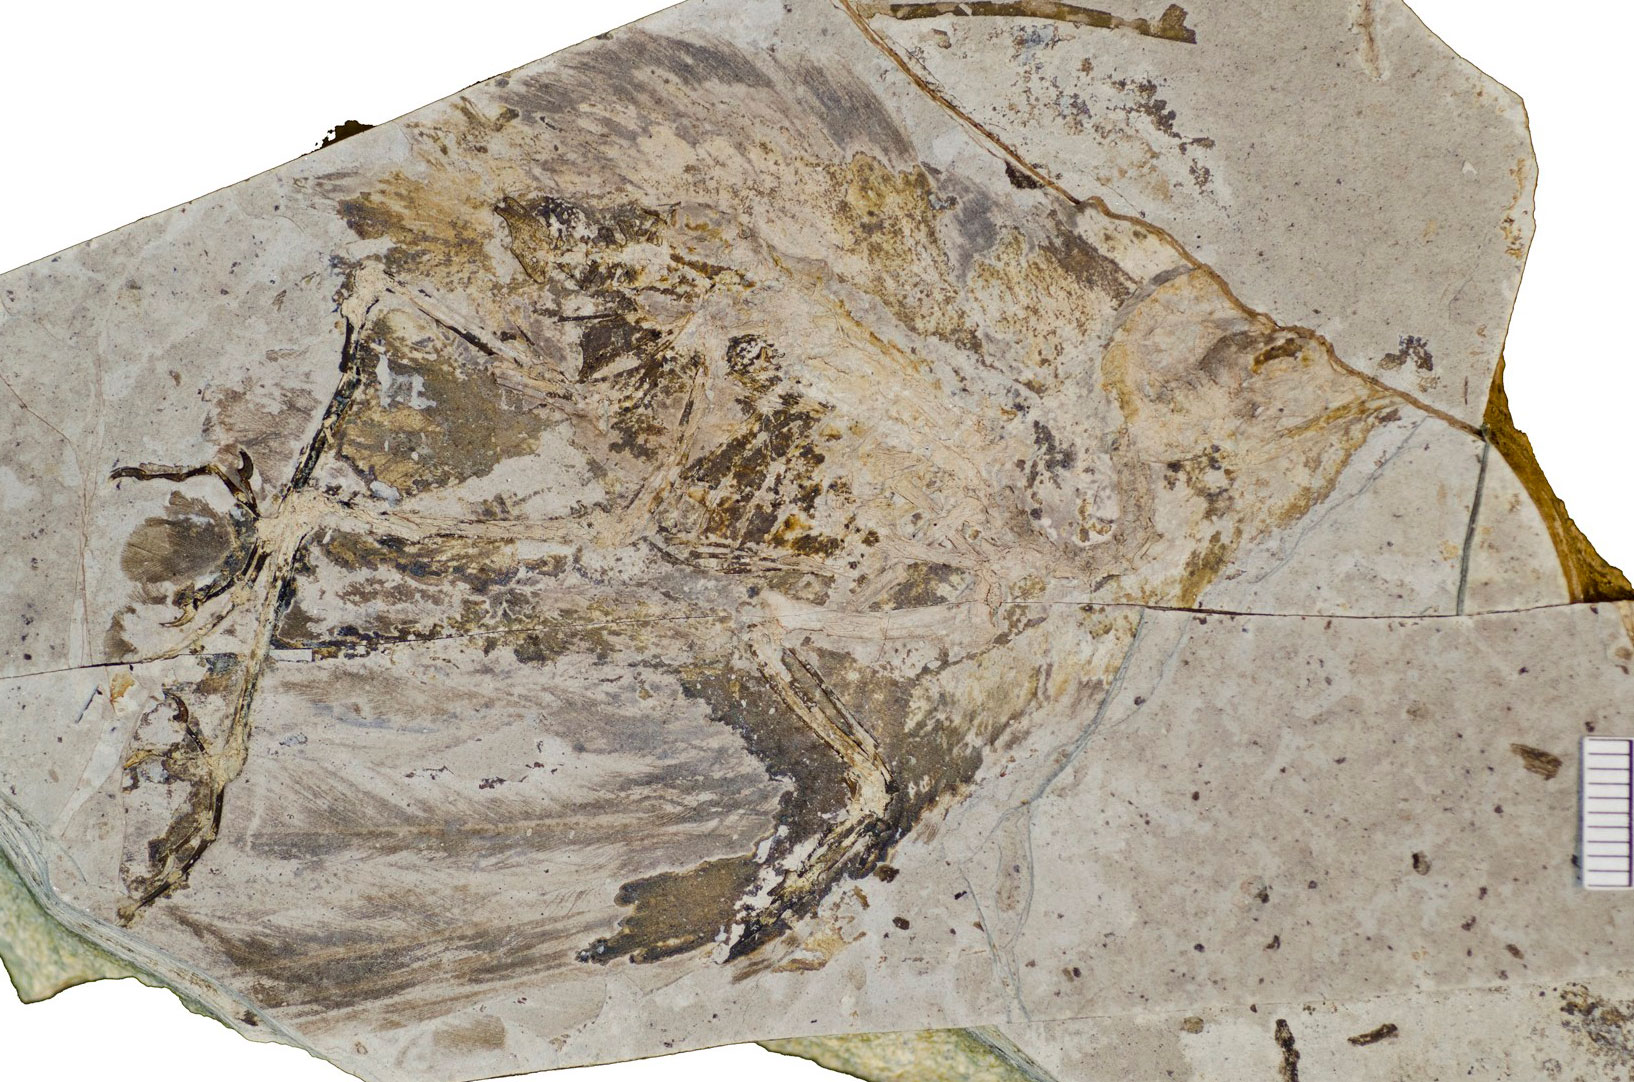 Photo of a fossil bird, Eocene, Florissant, Colorado. The skeleton does not appear well-preserved, although the legs and feet can be seen to the left of the image. Feather extent from the wings. The head appear short with a short, wide beak.